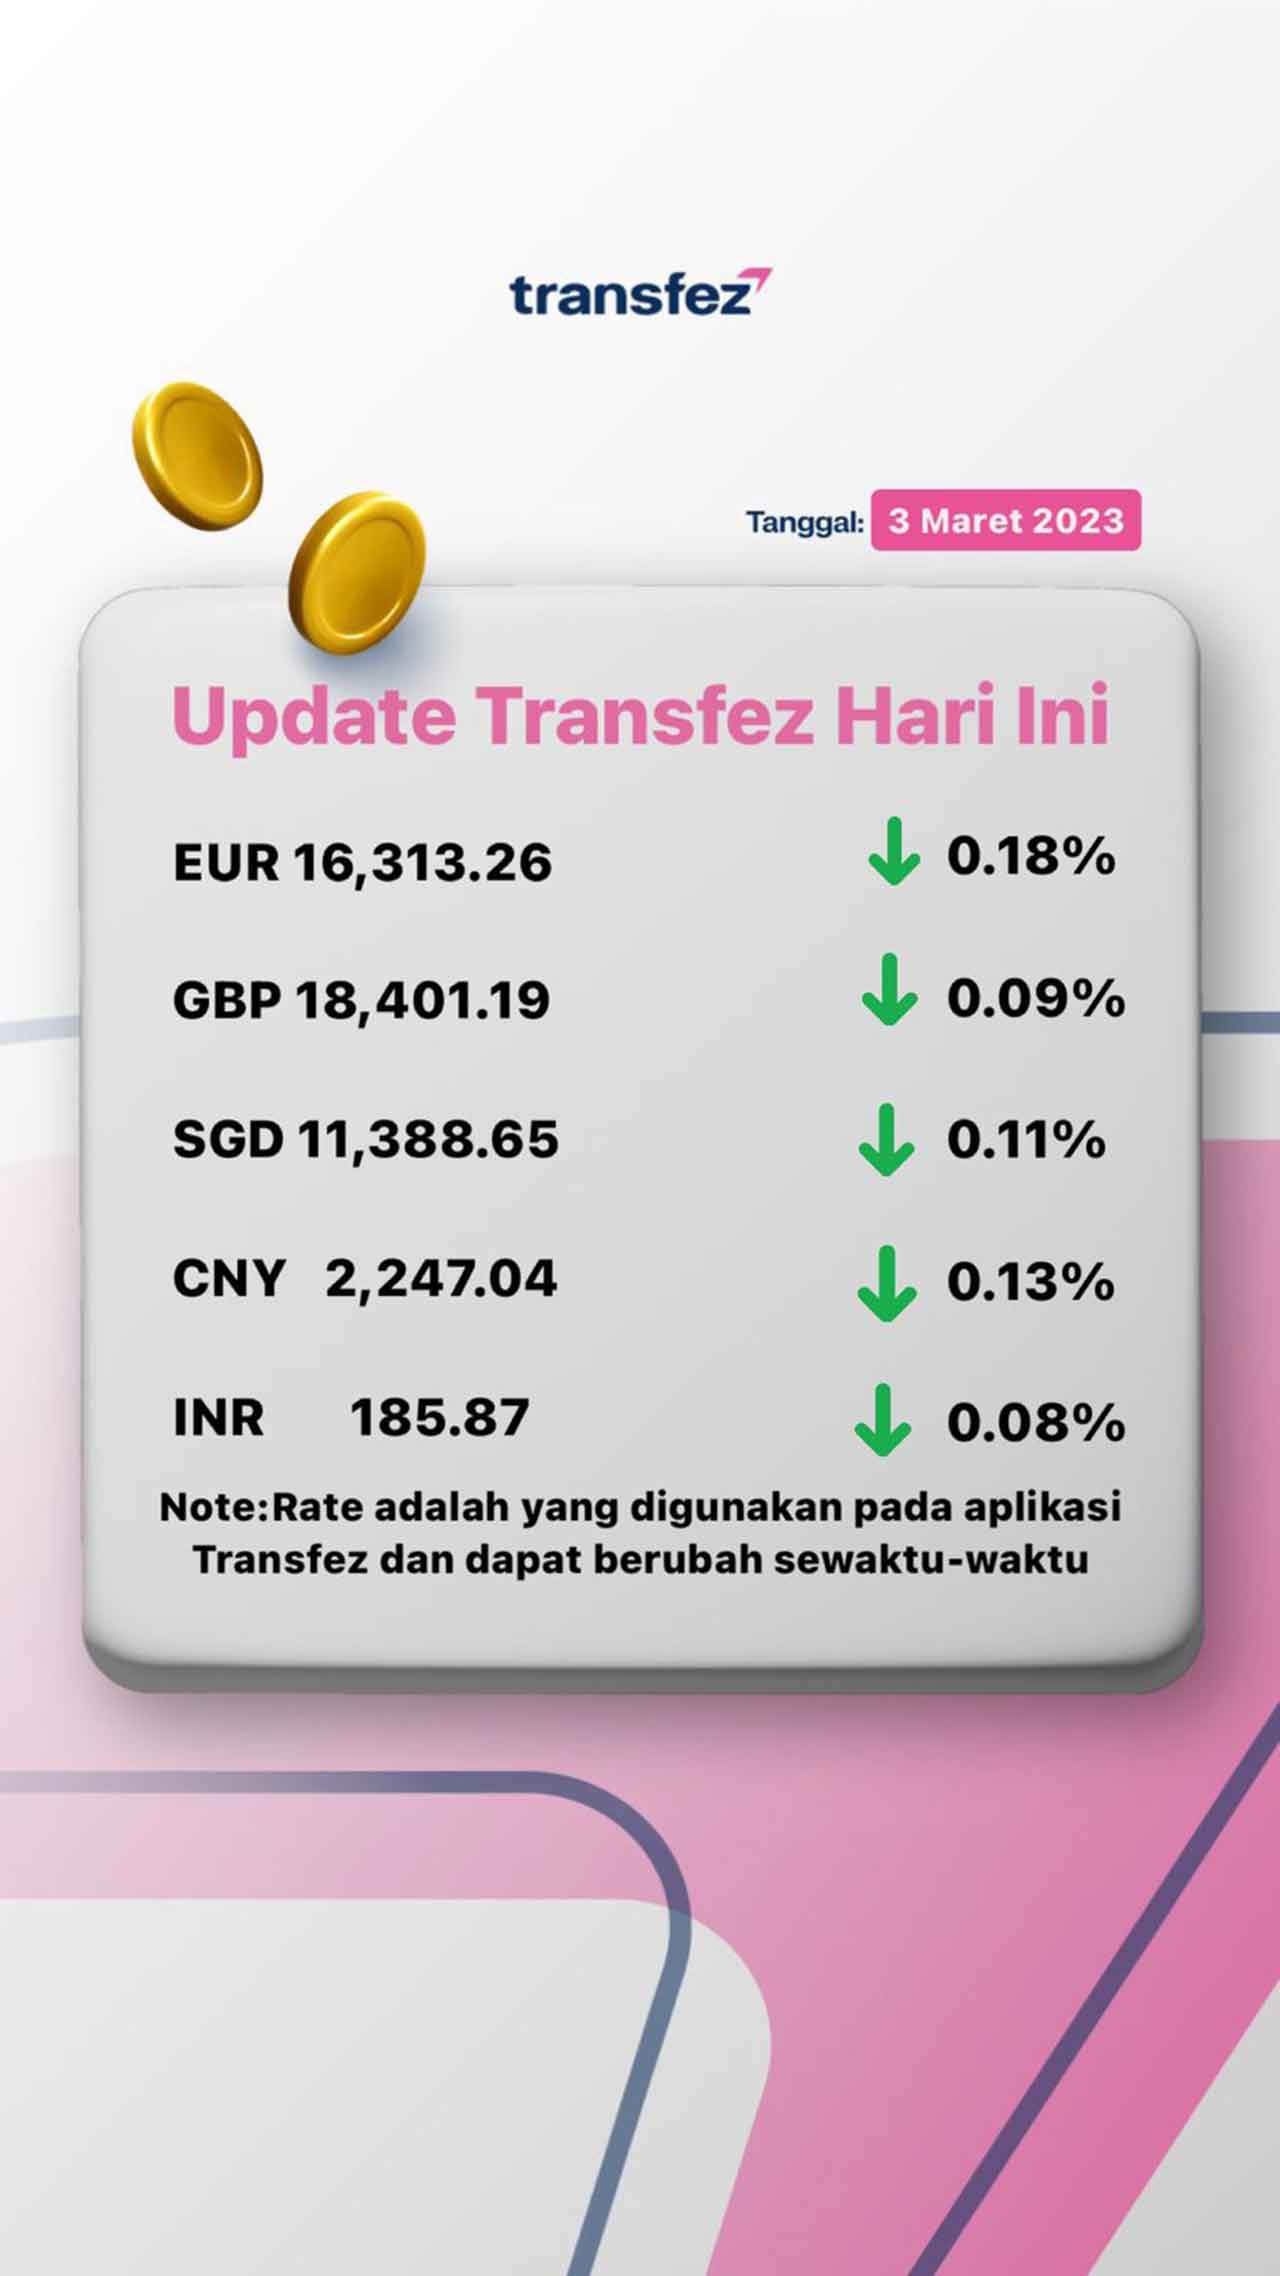 Today's Transfez Rate Update March 03 2023